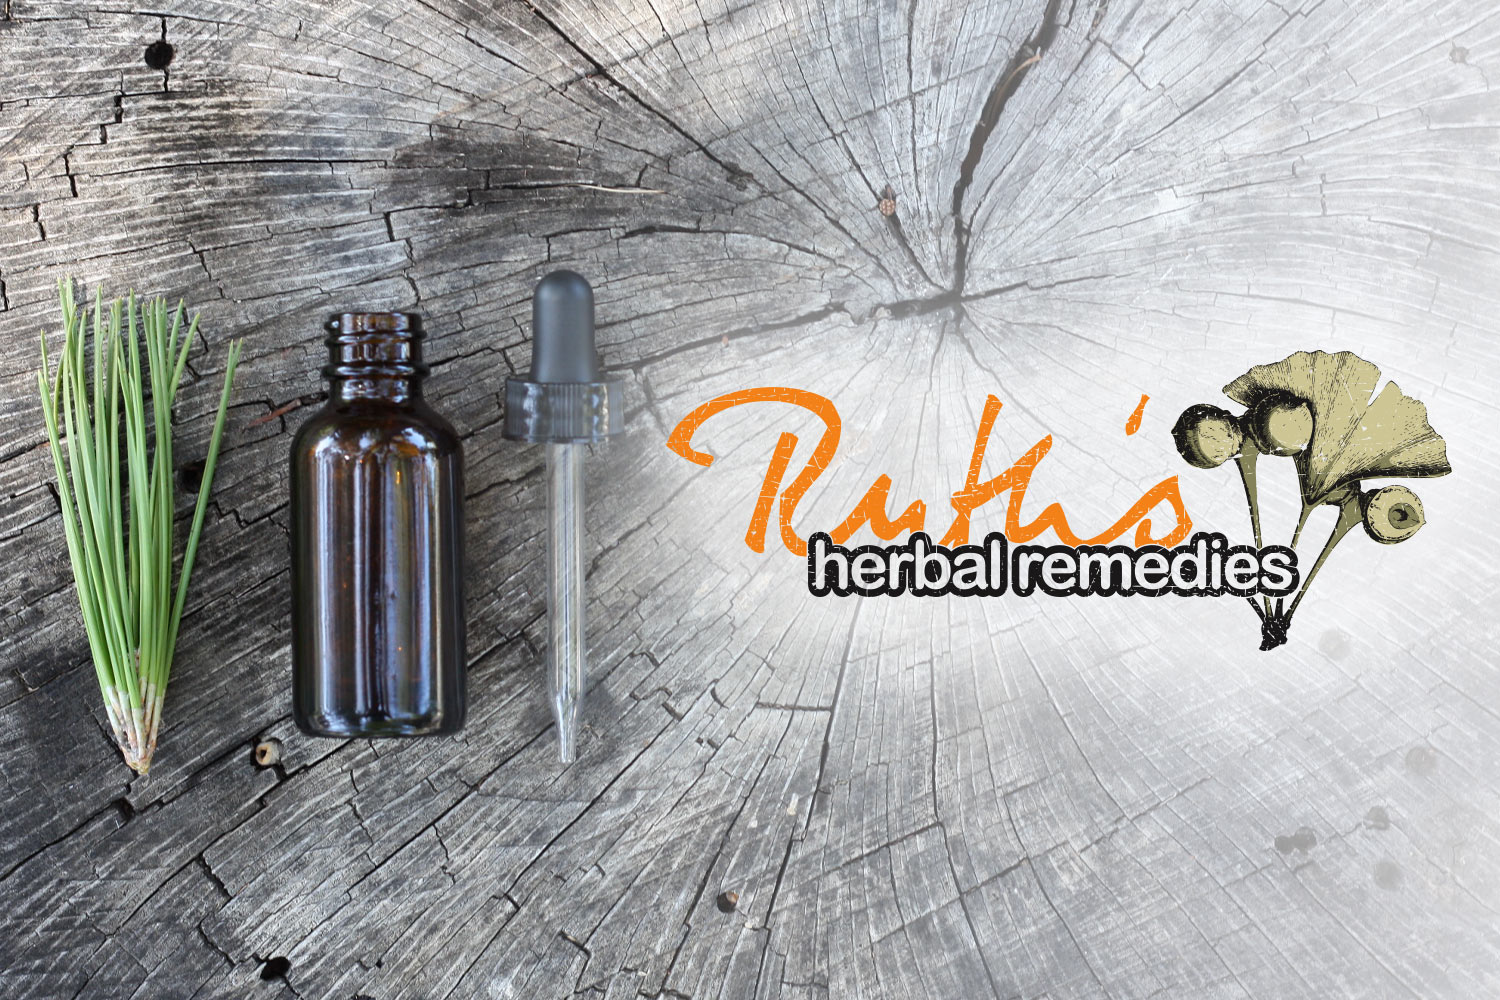 Ruth's Herbal Remedies - Logo and Identity Design